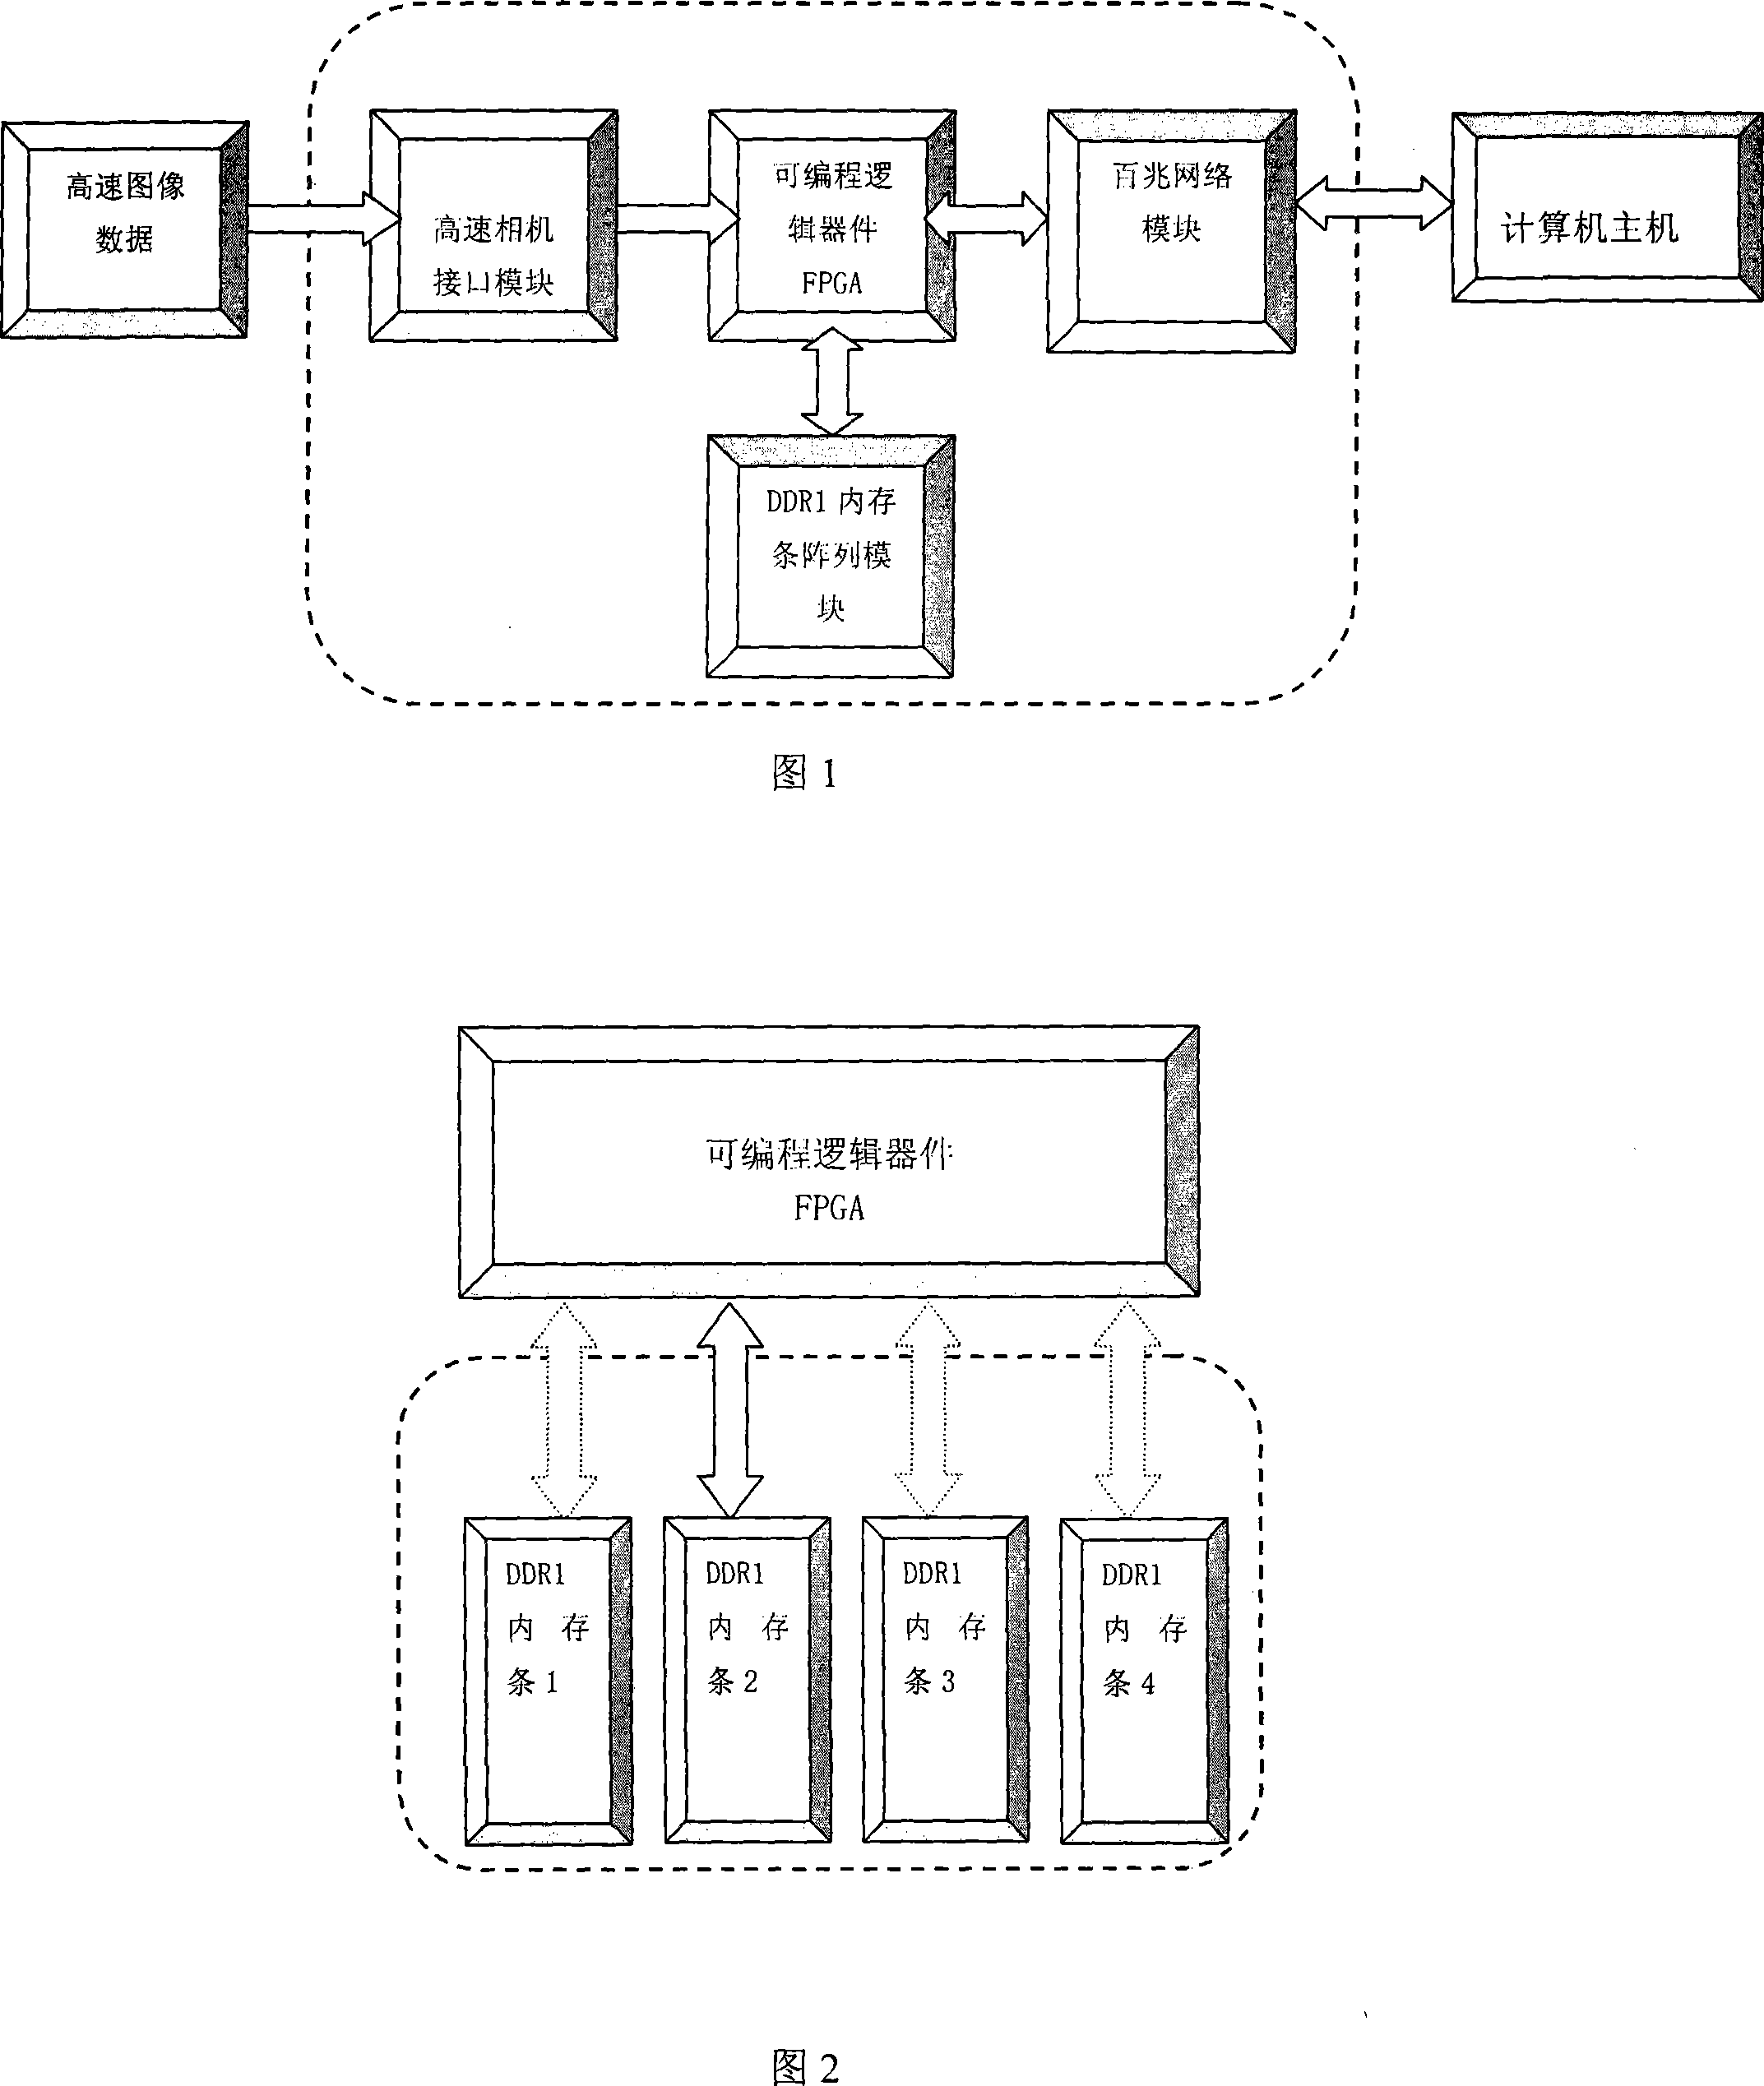 High speed image recording method based on memory array